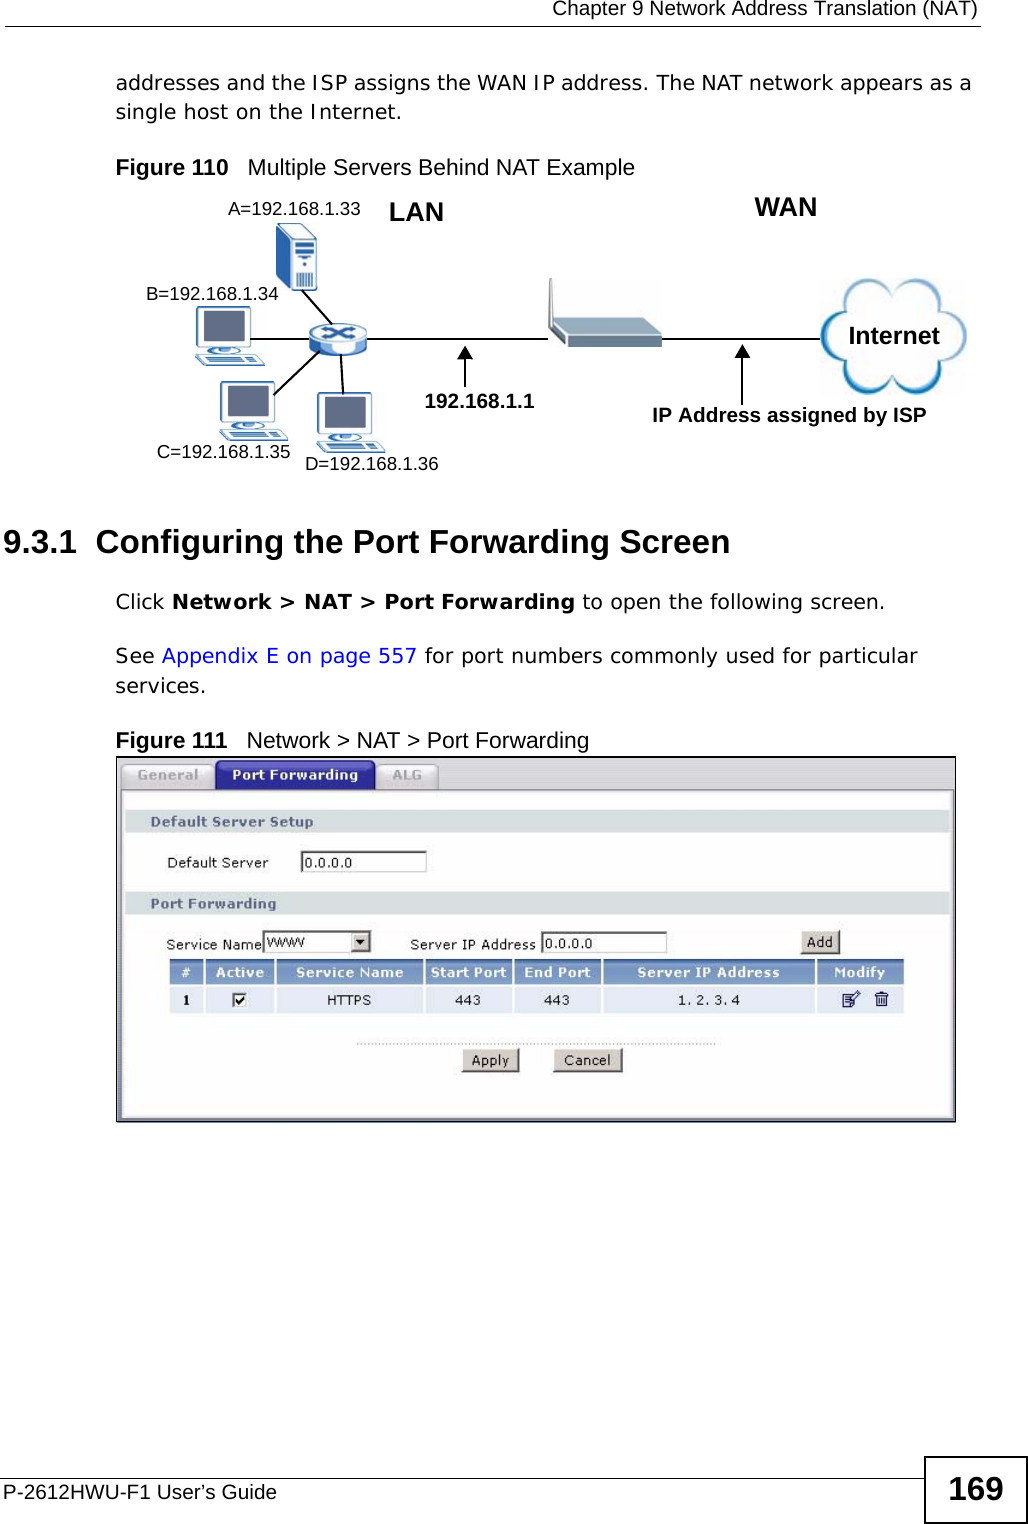  Chapter 9 Network Address Translation (NAT)P-2612HWU-F1 User’s Guide 169addresses and the ISP assigns the WAN IP address. The NAT network appears as a single host on the Internet.Figure 110   Multiple Servers Behind NAT Example9.3.1  Configuring the Port Forwarding ScreenClick Network &gt; NAT &gt; Port Forwarding to open the following screen.See Appendix E on page 557 for port numbers commonly used for particular services. Figure 111   Network &gt; NAT &gt; Port ForwardingA=192.168.1.33D=192.168.1.36C=192.168.1.35B=192.168.1.34InternetWANLAN192.168.1.1 IP Address assigned by ISP